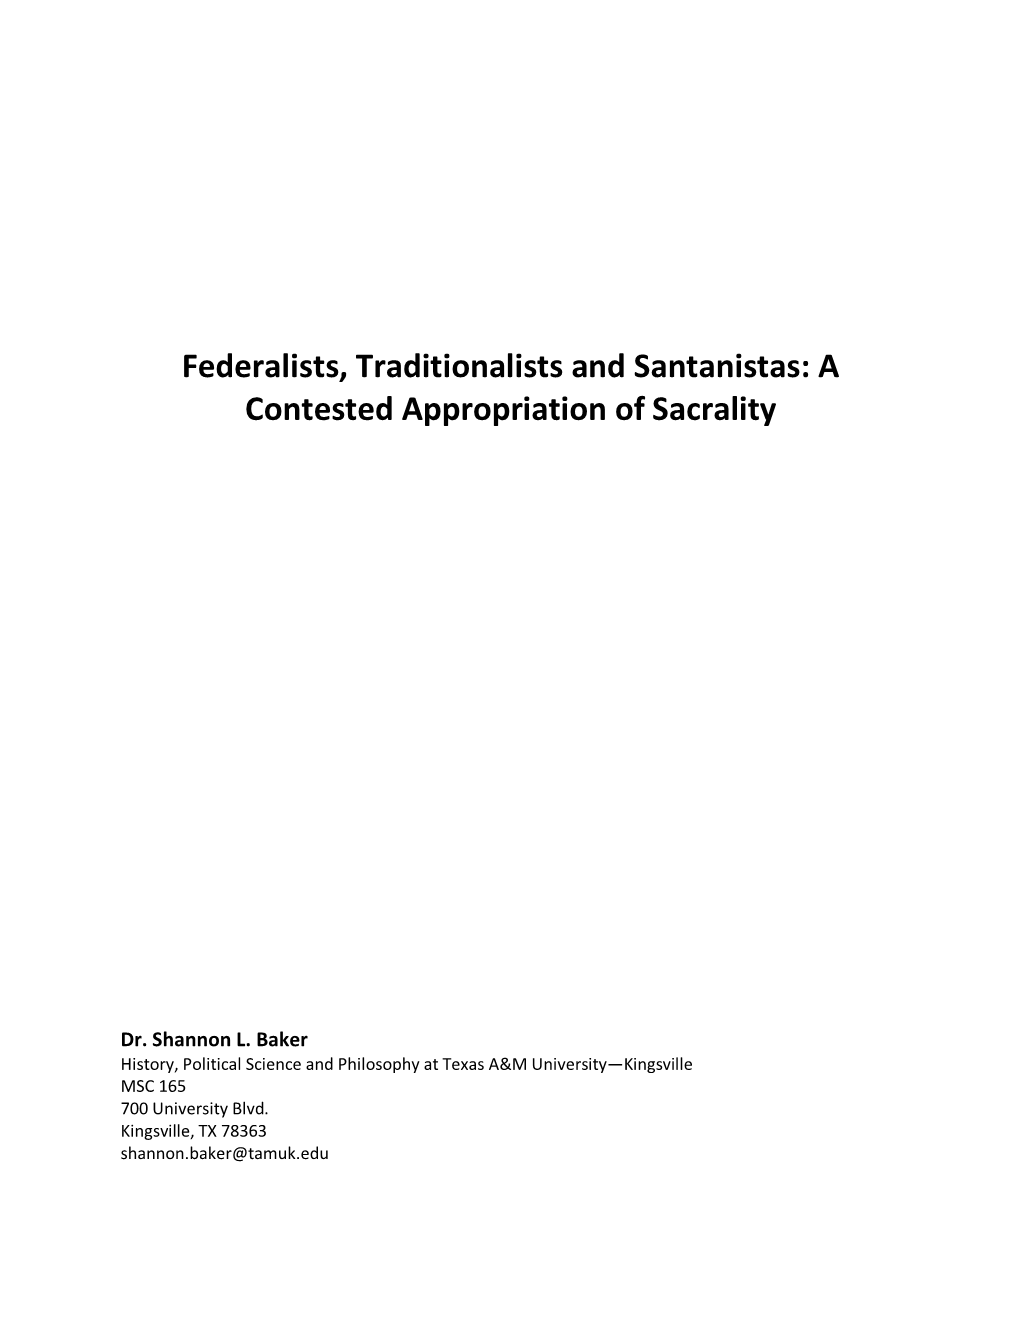 Federalists, Traditionalists and Santanistas: a Contested Appropriation of Sacrality